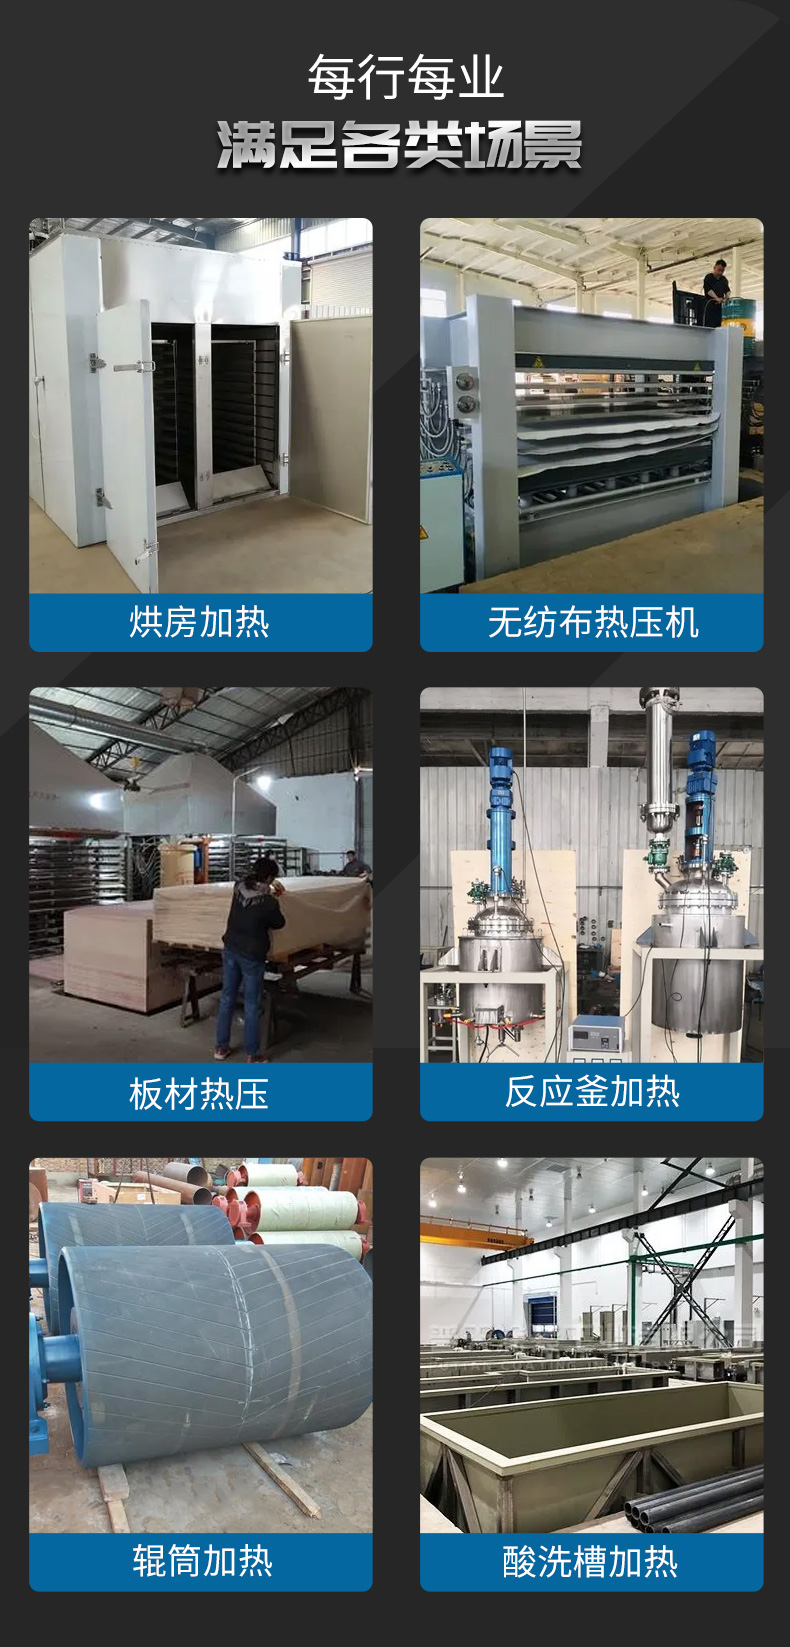 Manufacturer provides integrated thermal oil heater, explosion-proof thermal oil heater for reaction kettle press